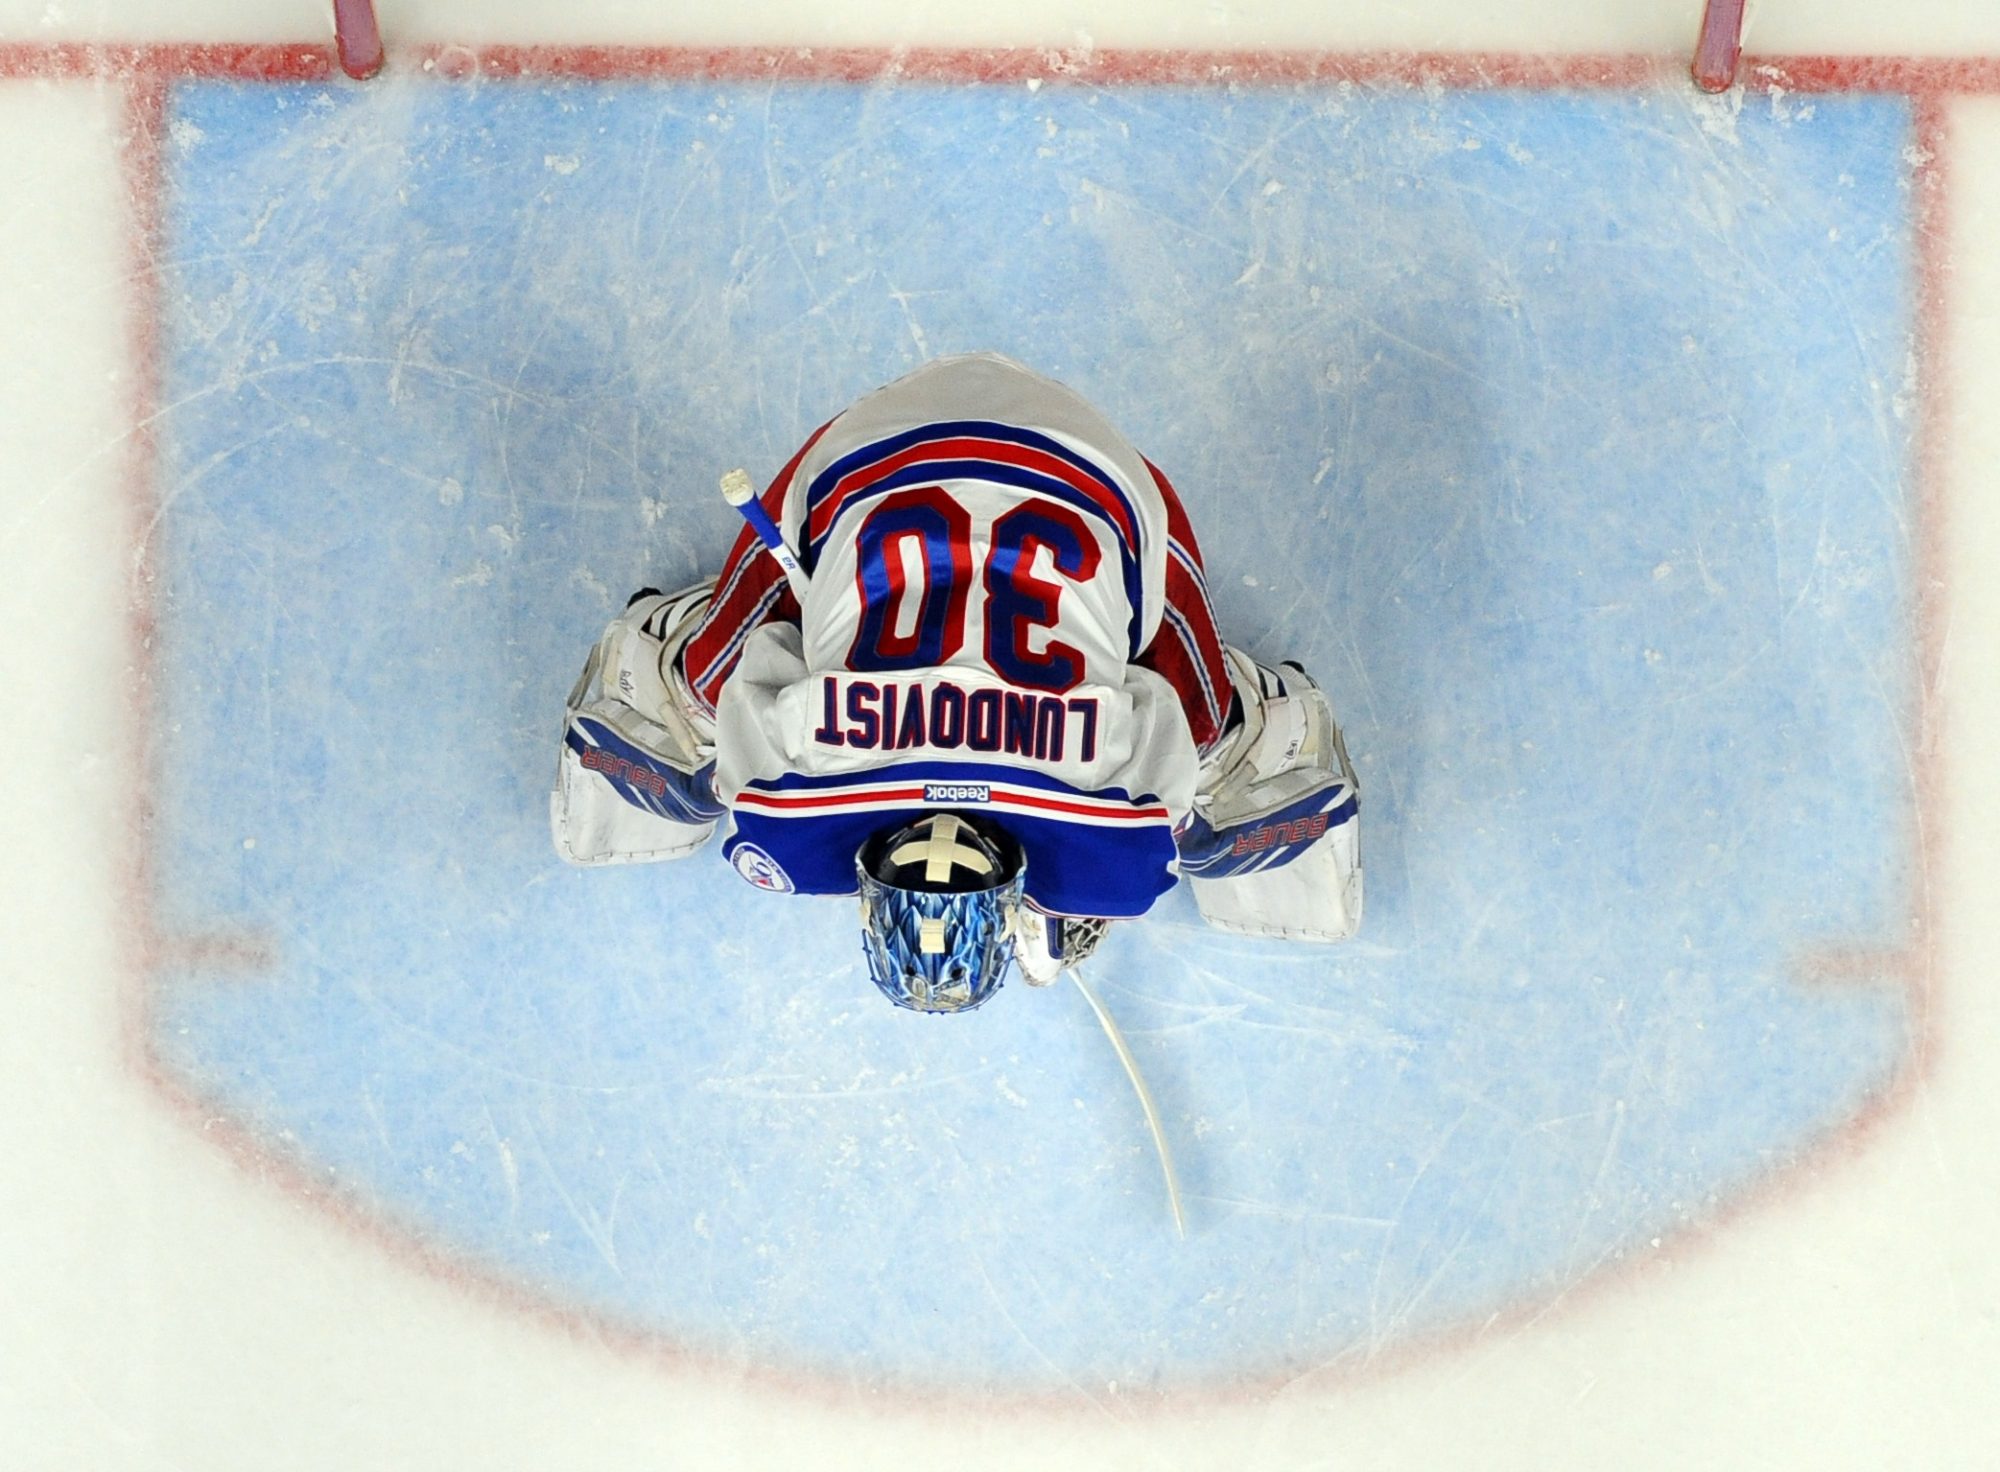 New York Rangers' Henrik Lundqvist: The King has 400 wins, cementing his legacy beyond doubt 2